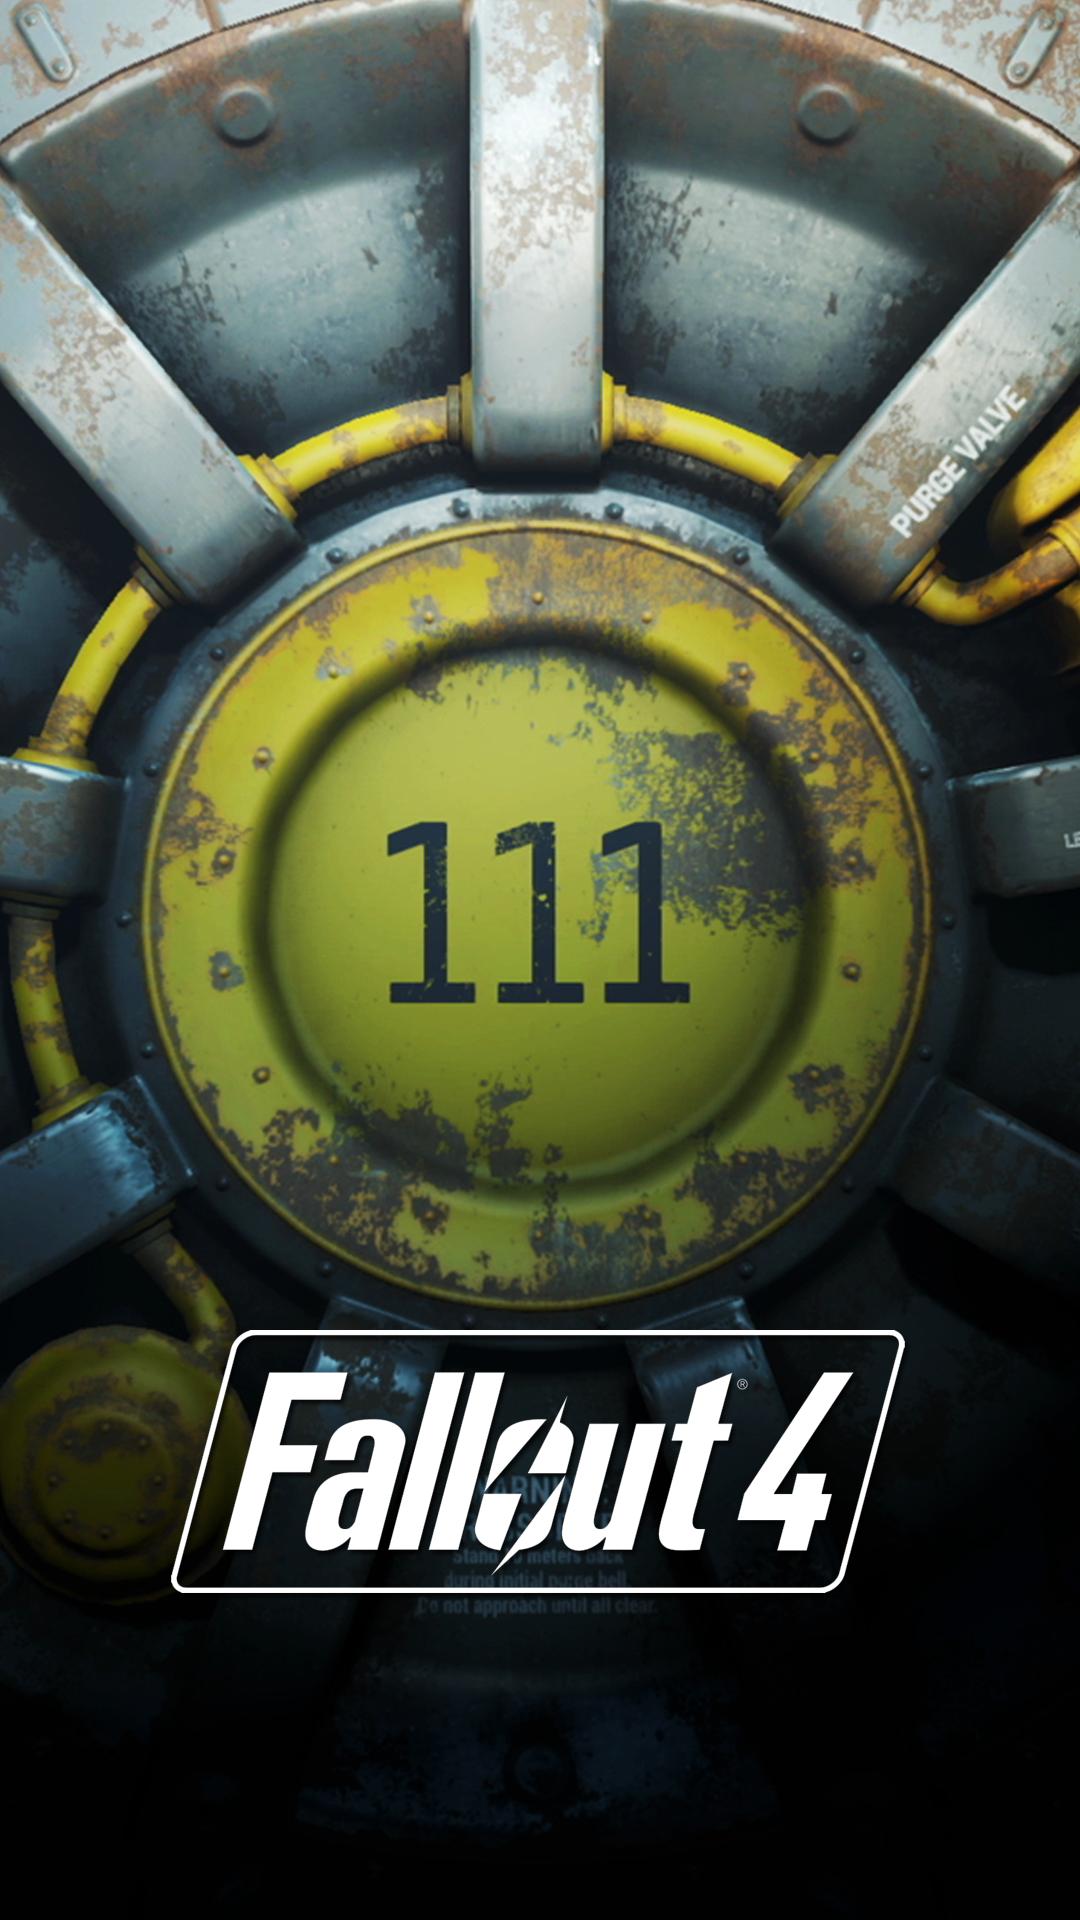 Put Fallout 4 on your phone with these lock screen wallpapers